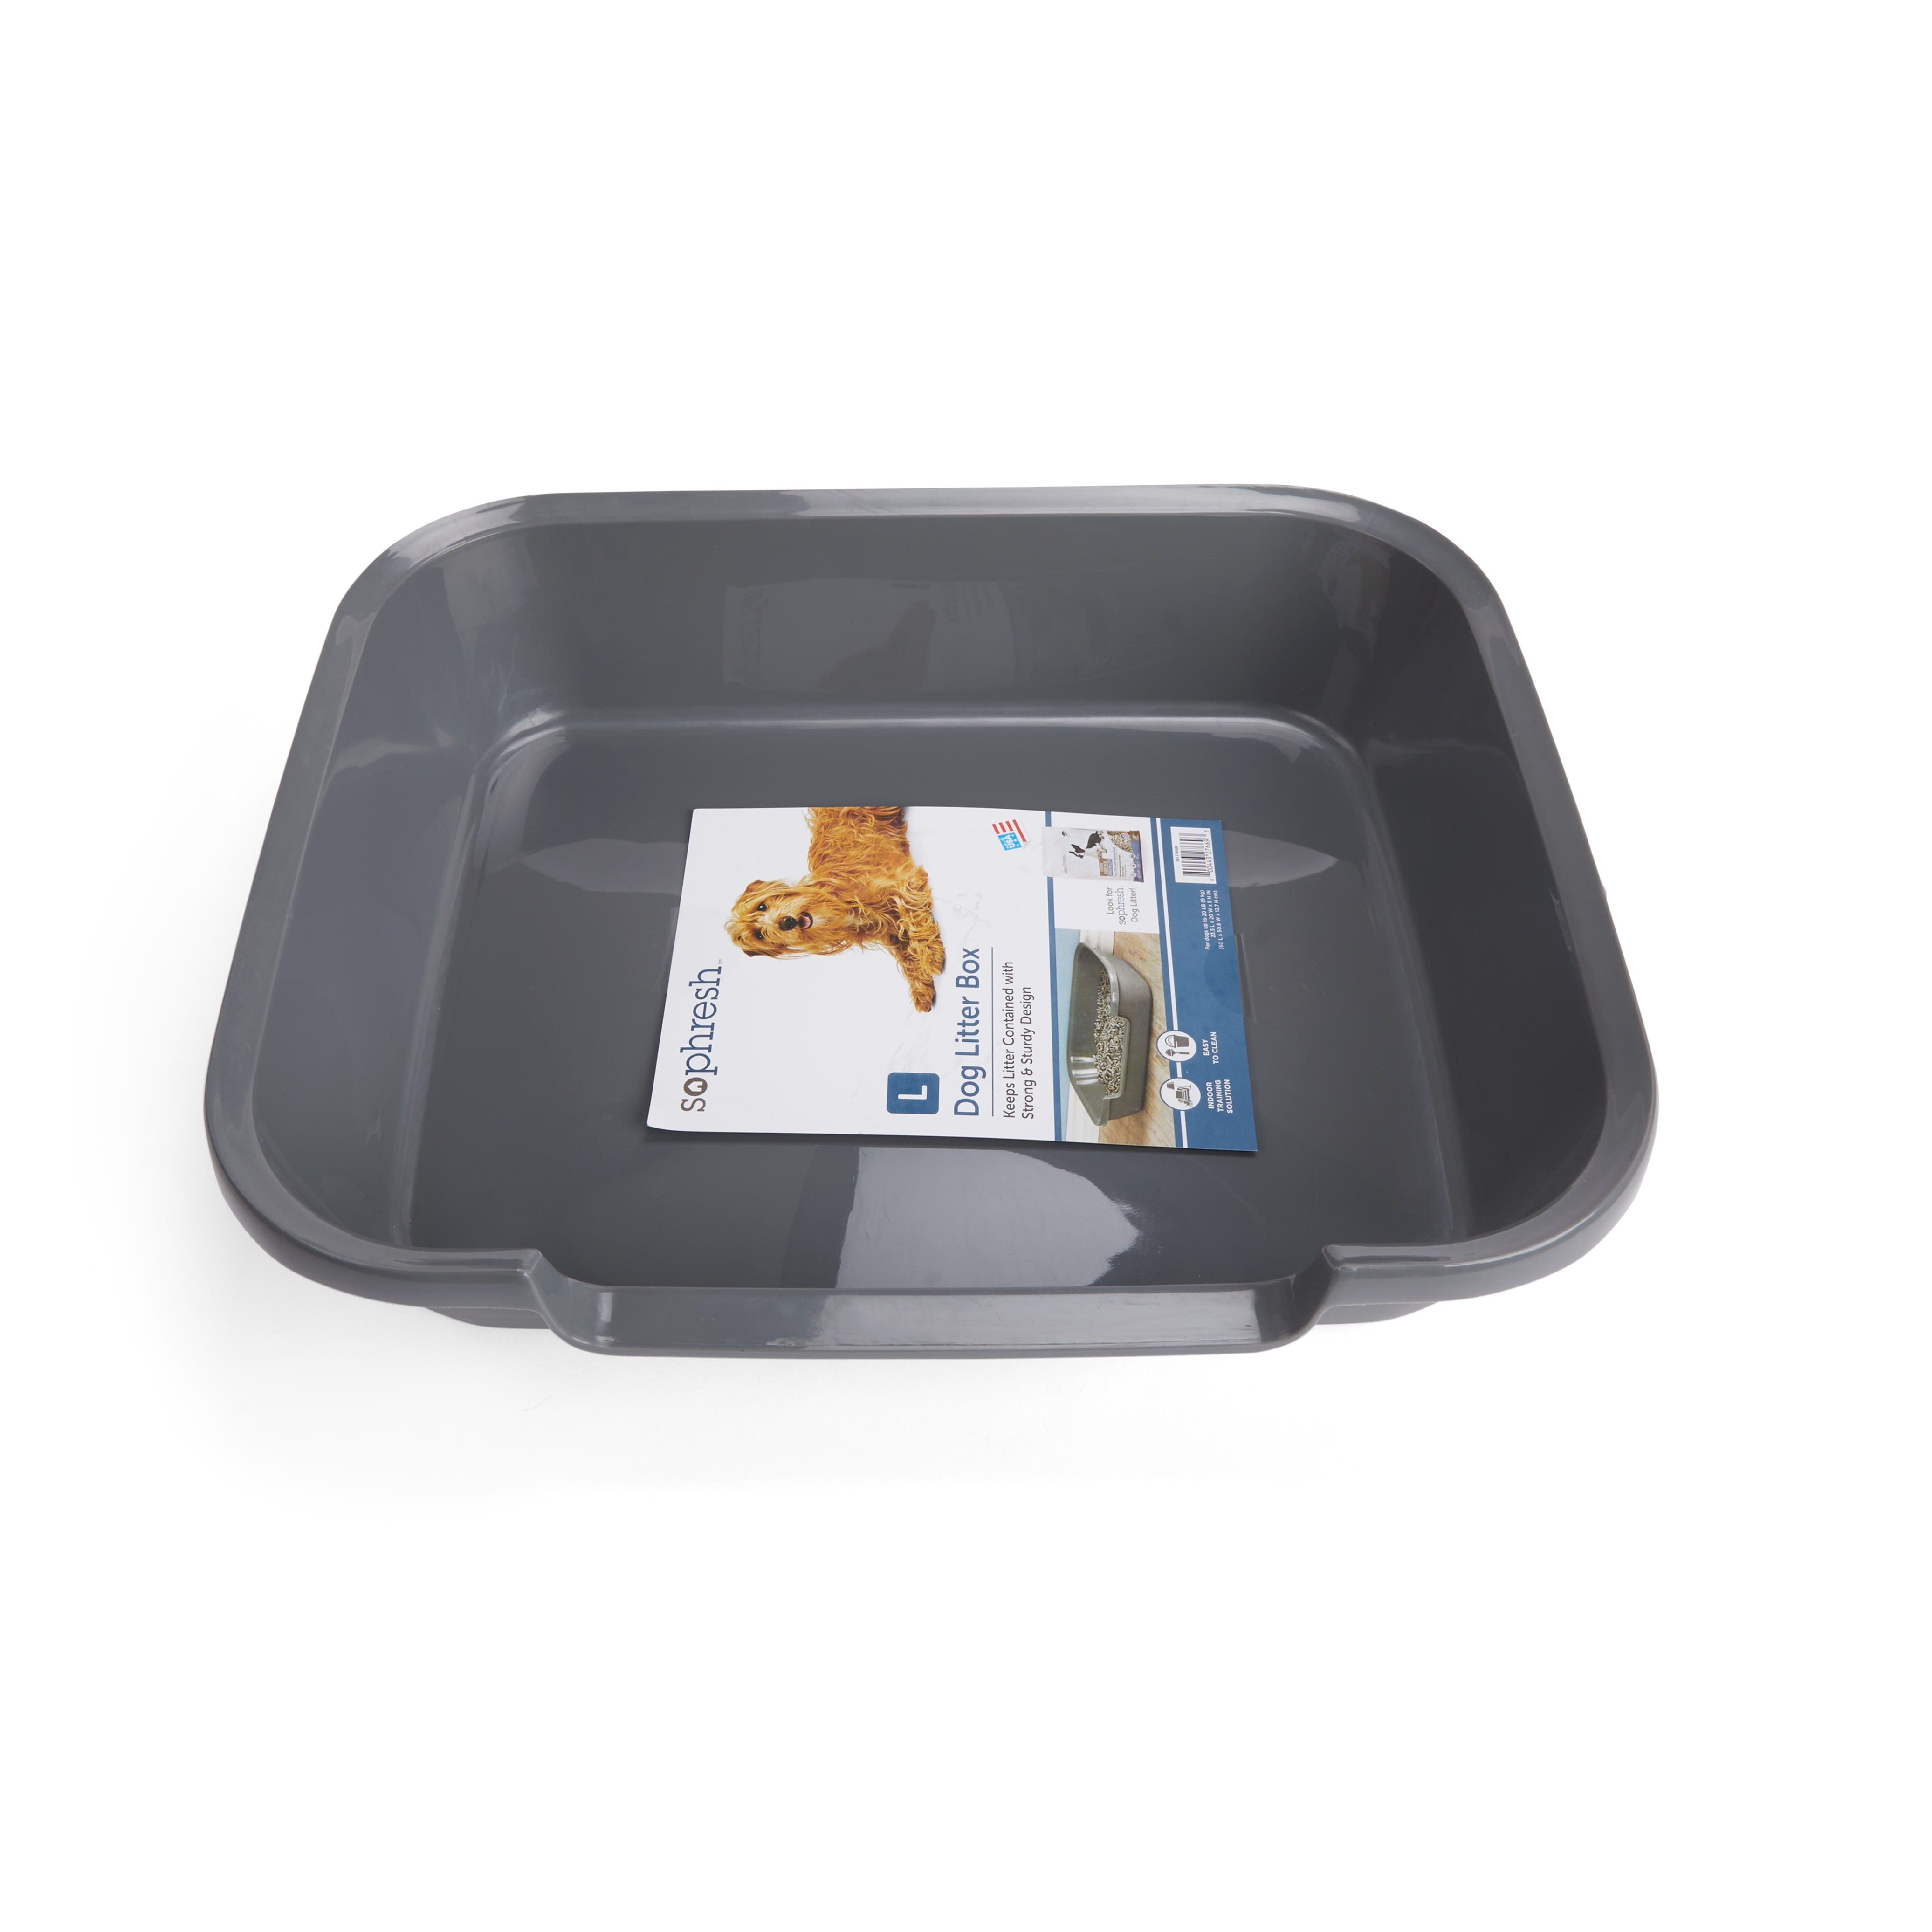 Choose The Right Size for Your Dog Training Guide Included 3 Sizes PuppyGoHere Dog Litter Pan Litter Box Training Great for Senior Cats with Special Needs and Rabbits.USA 